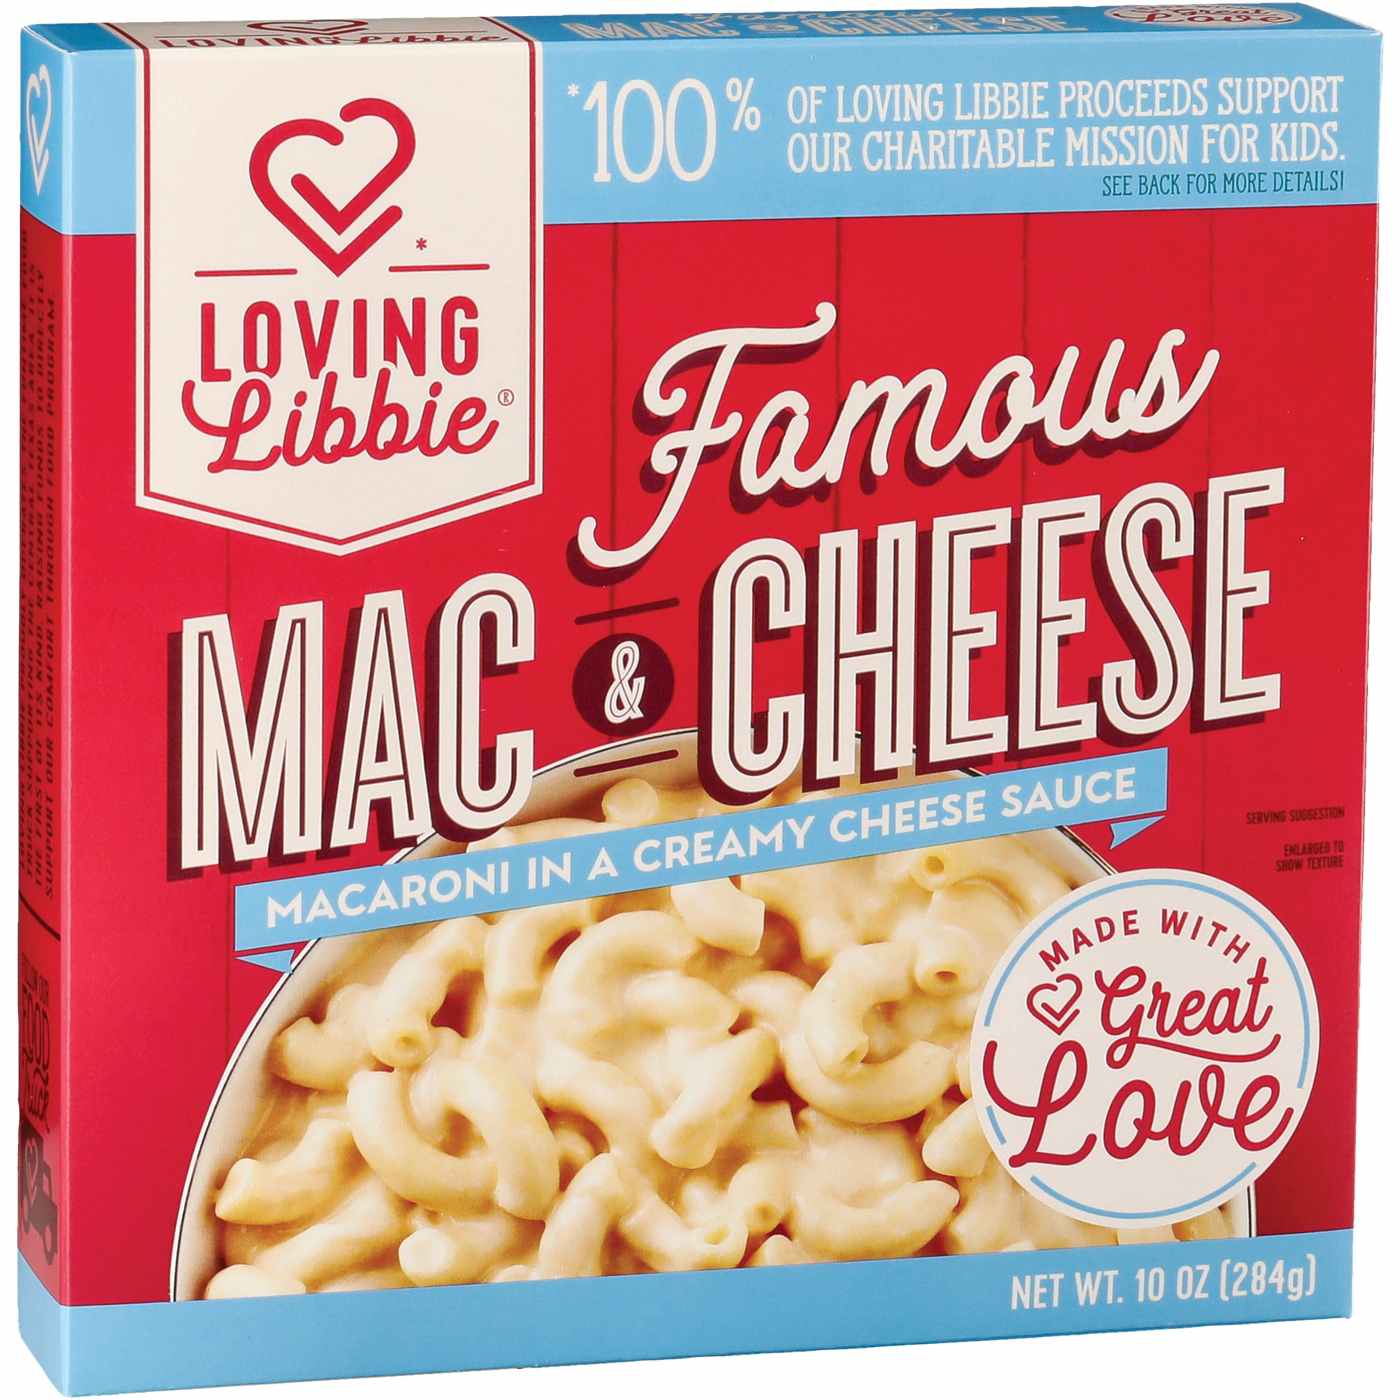 Loving Libbie Famous Mac & Cheese Frozen Meal; image 1 of 3